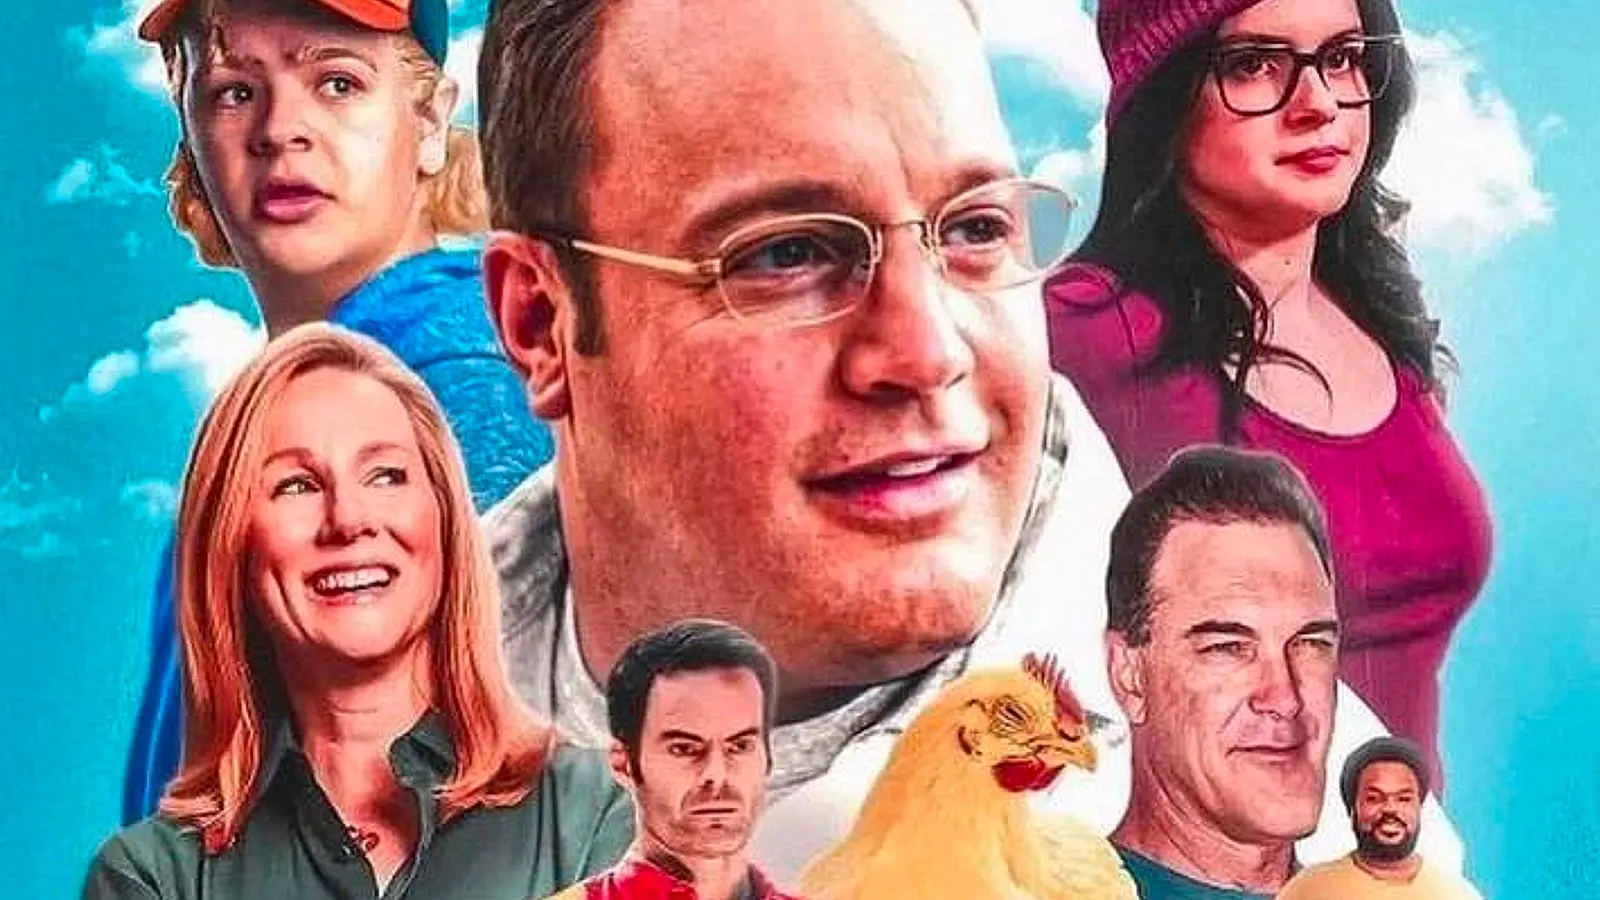 Family Guy Live-Action Movie on Netflix: Separating Fact from Fiction in Viral Rumors